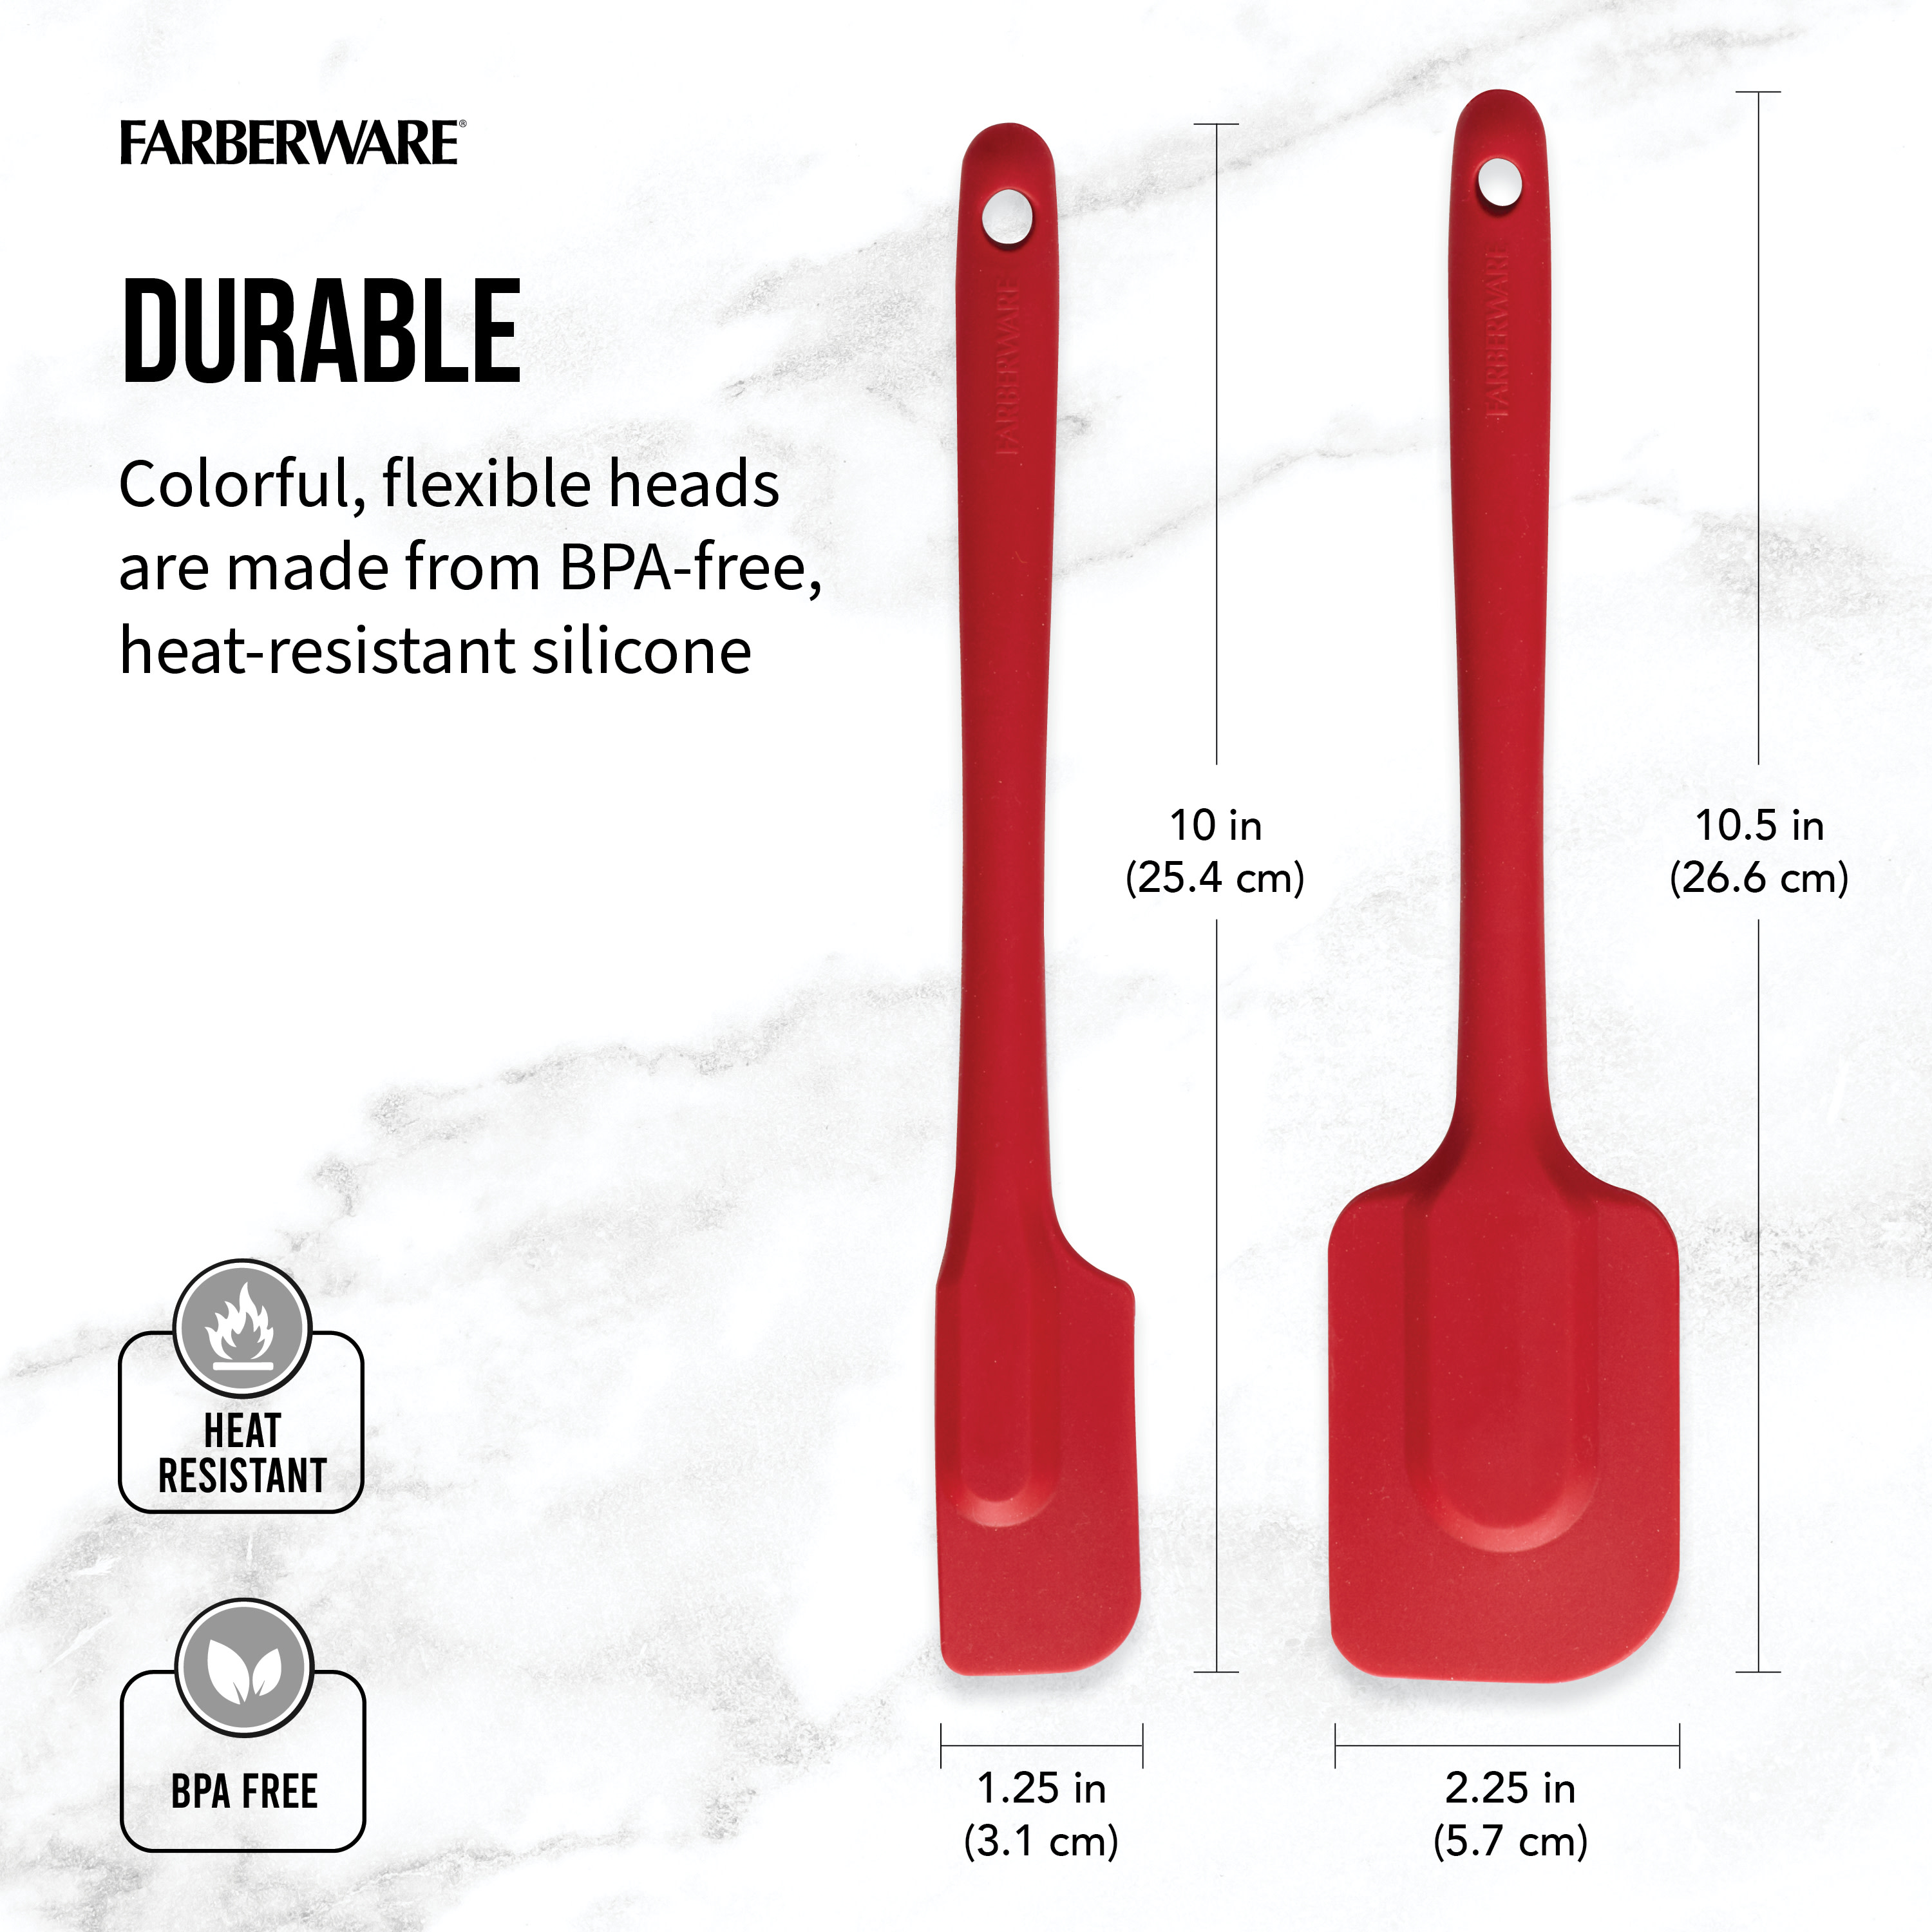 Farberware Professional Silicone Solid Red Spatula Set of 2 - image 5 of 10